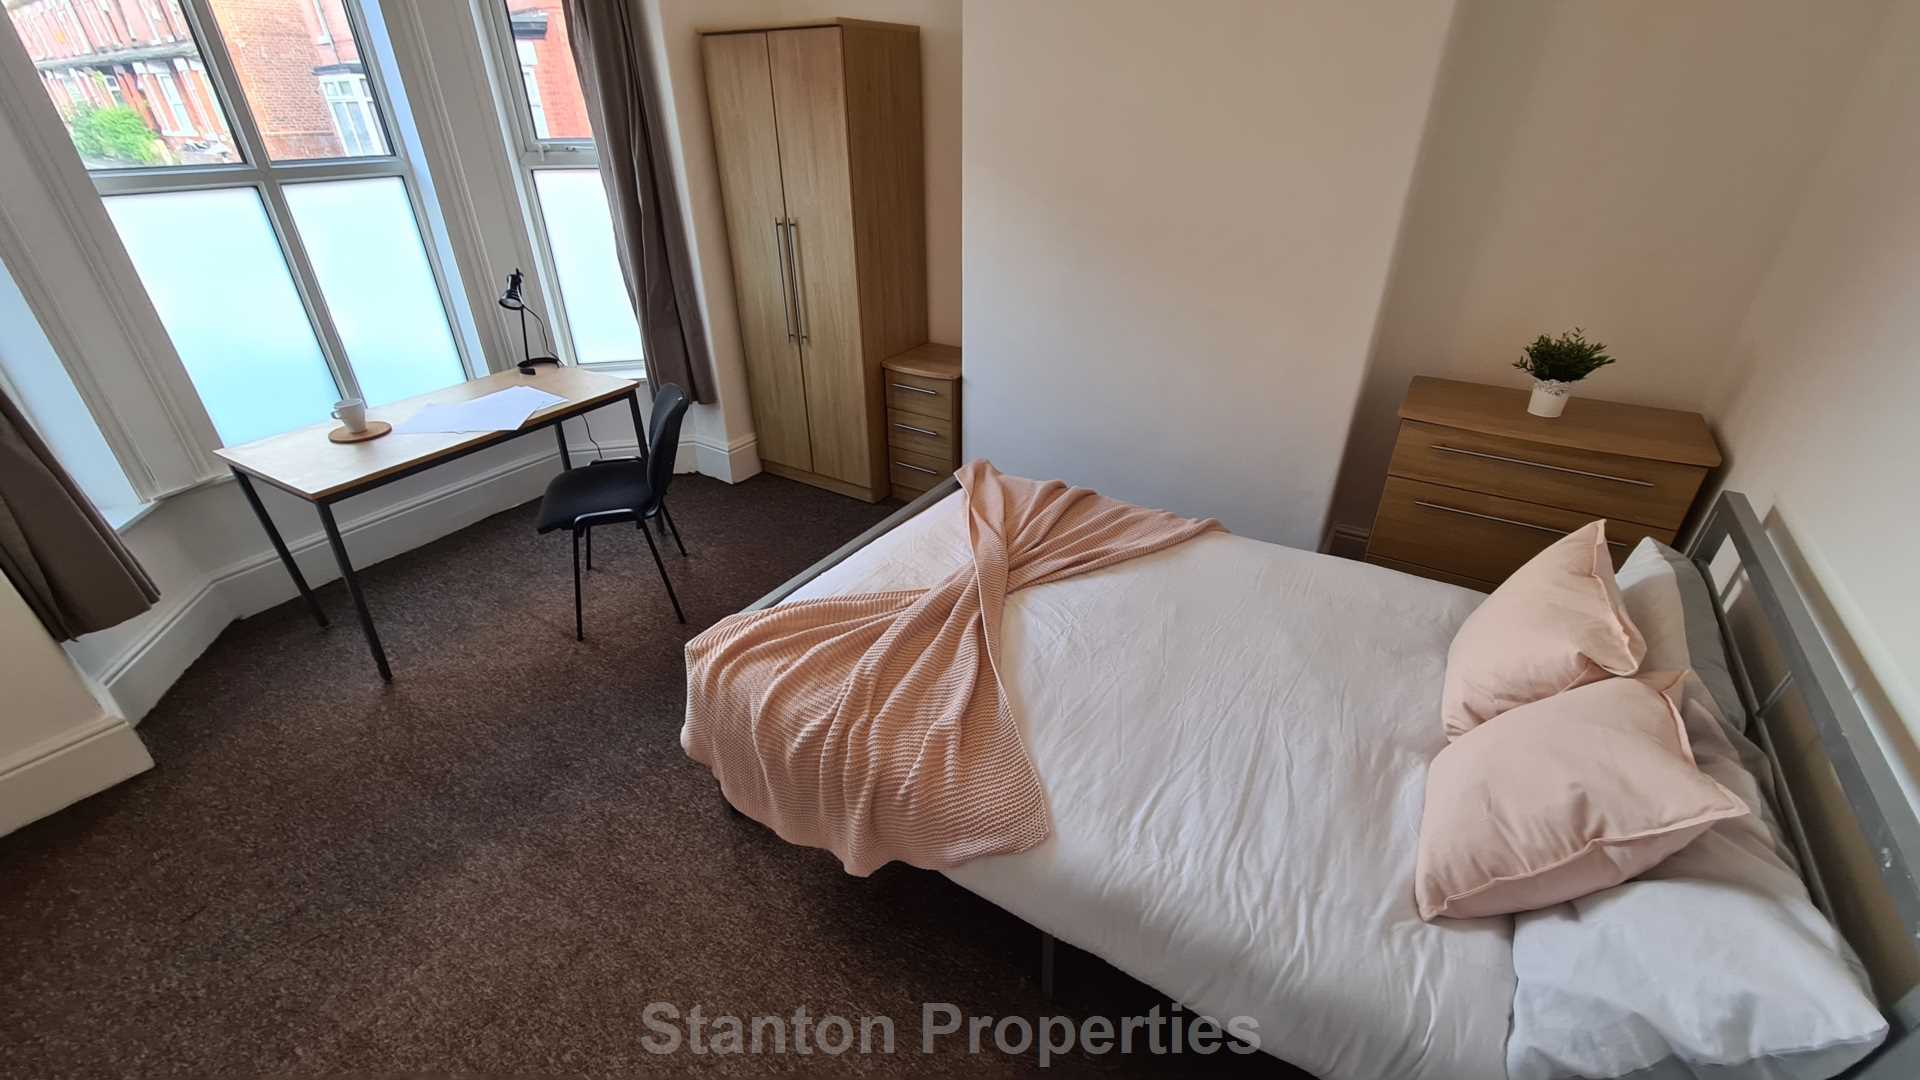 See Video Tour, £130 pppw, Albion Road, Manchester, Image 12